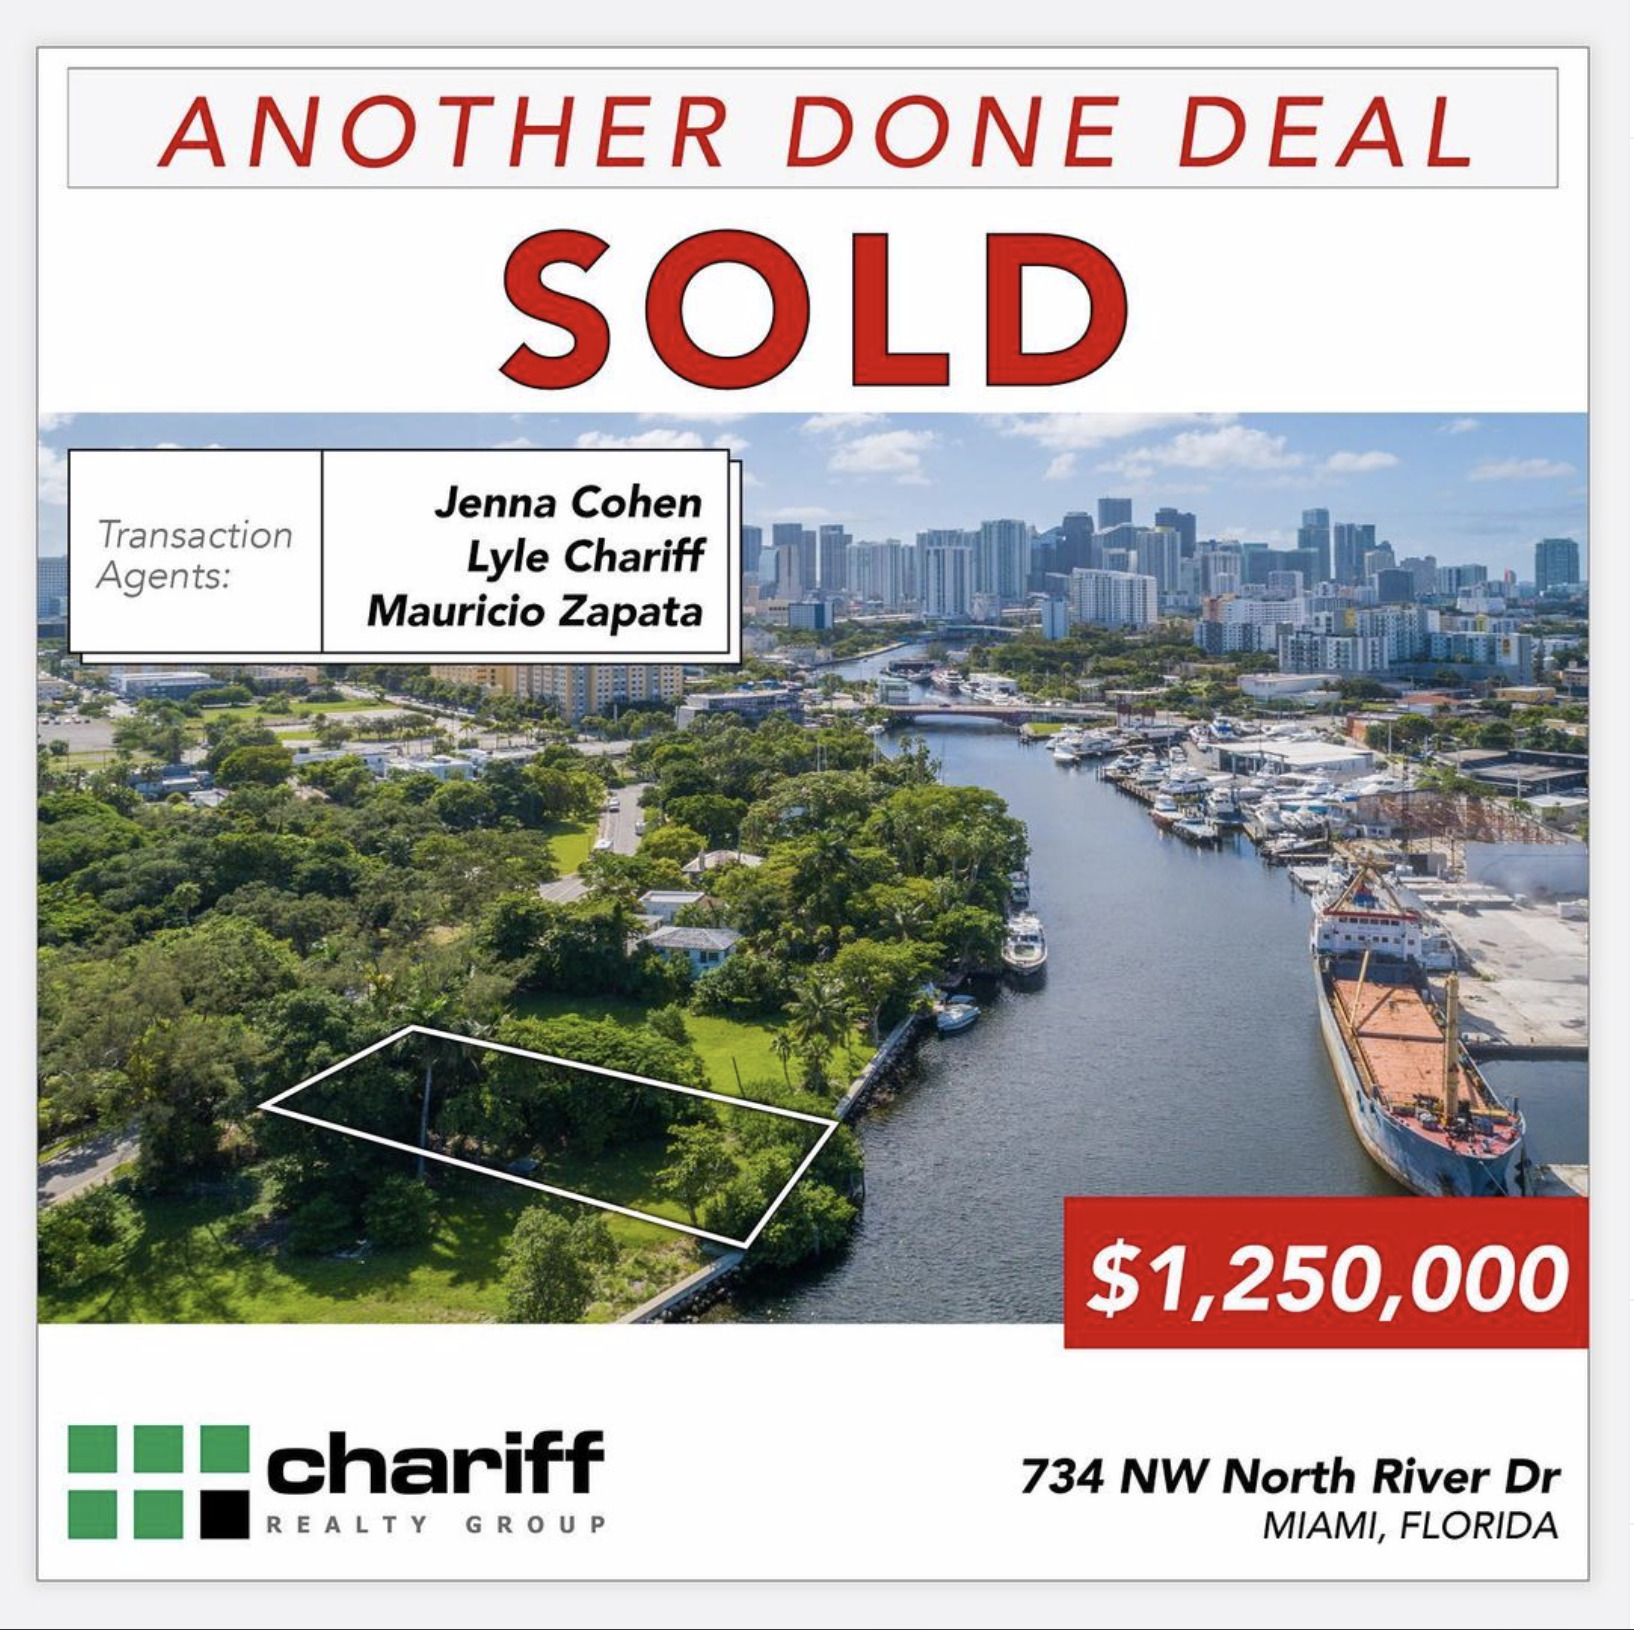 734 NW North River Dr - Miami, Florida, Another Done Deal Sold - Chariff Realty Group